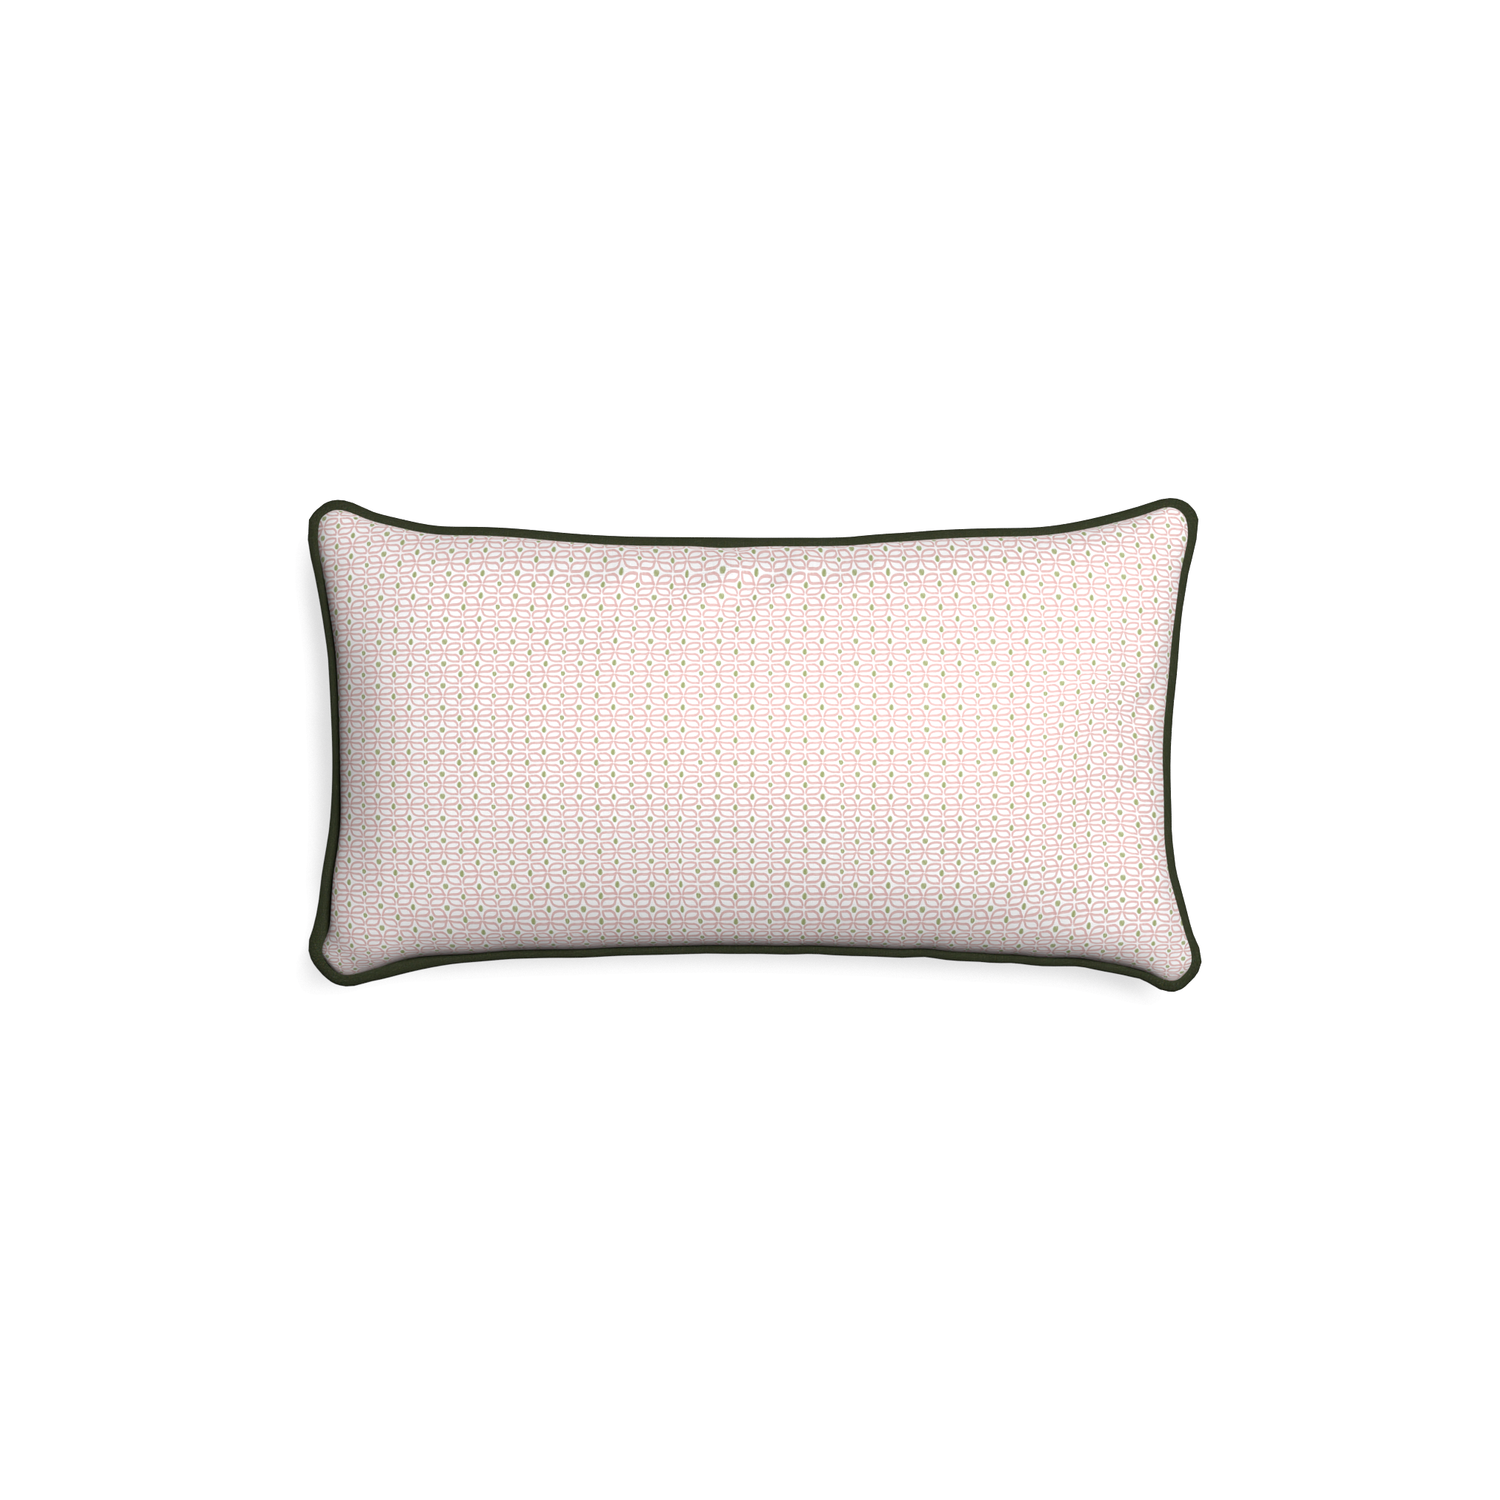 Petite-lumbar loomi pink custom pink geometricpillow with f piping on white background